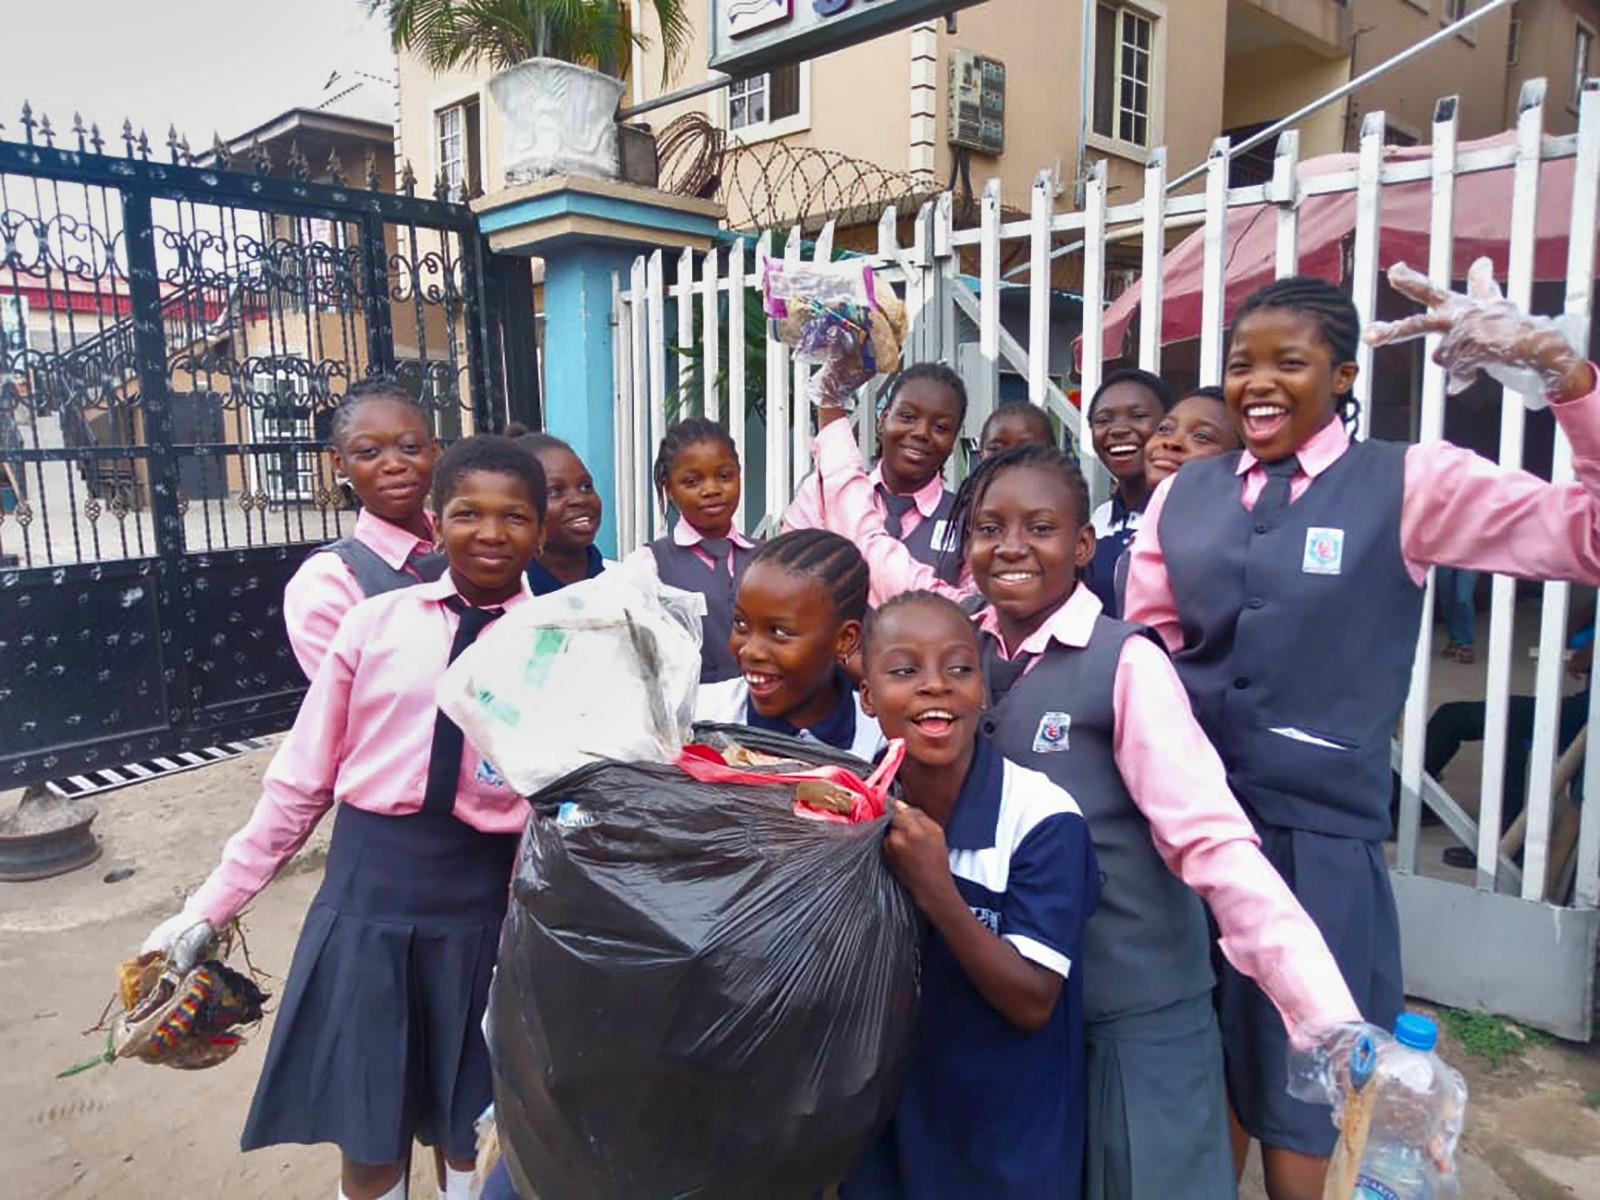 A group of girls smiling, looking into the camera, while holding a big plastic bag of litter